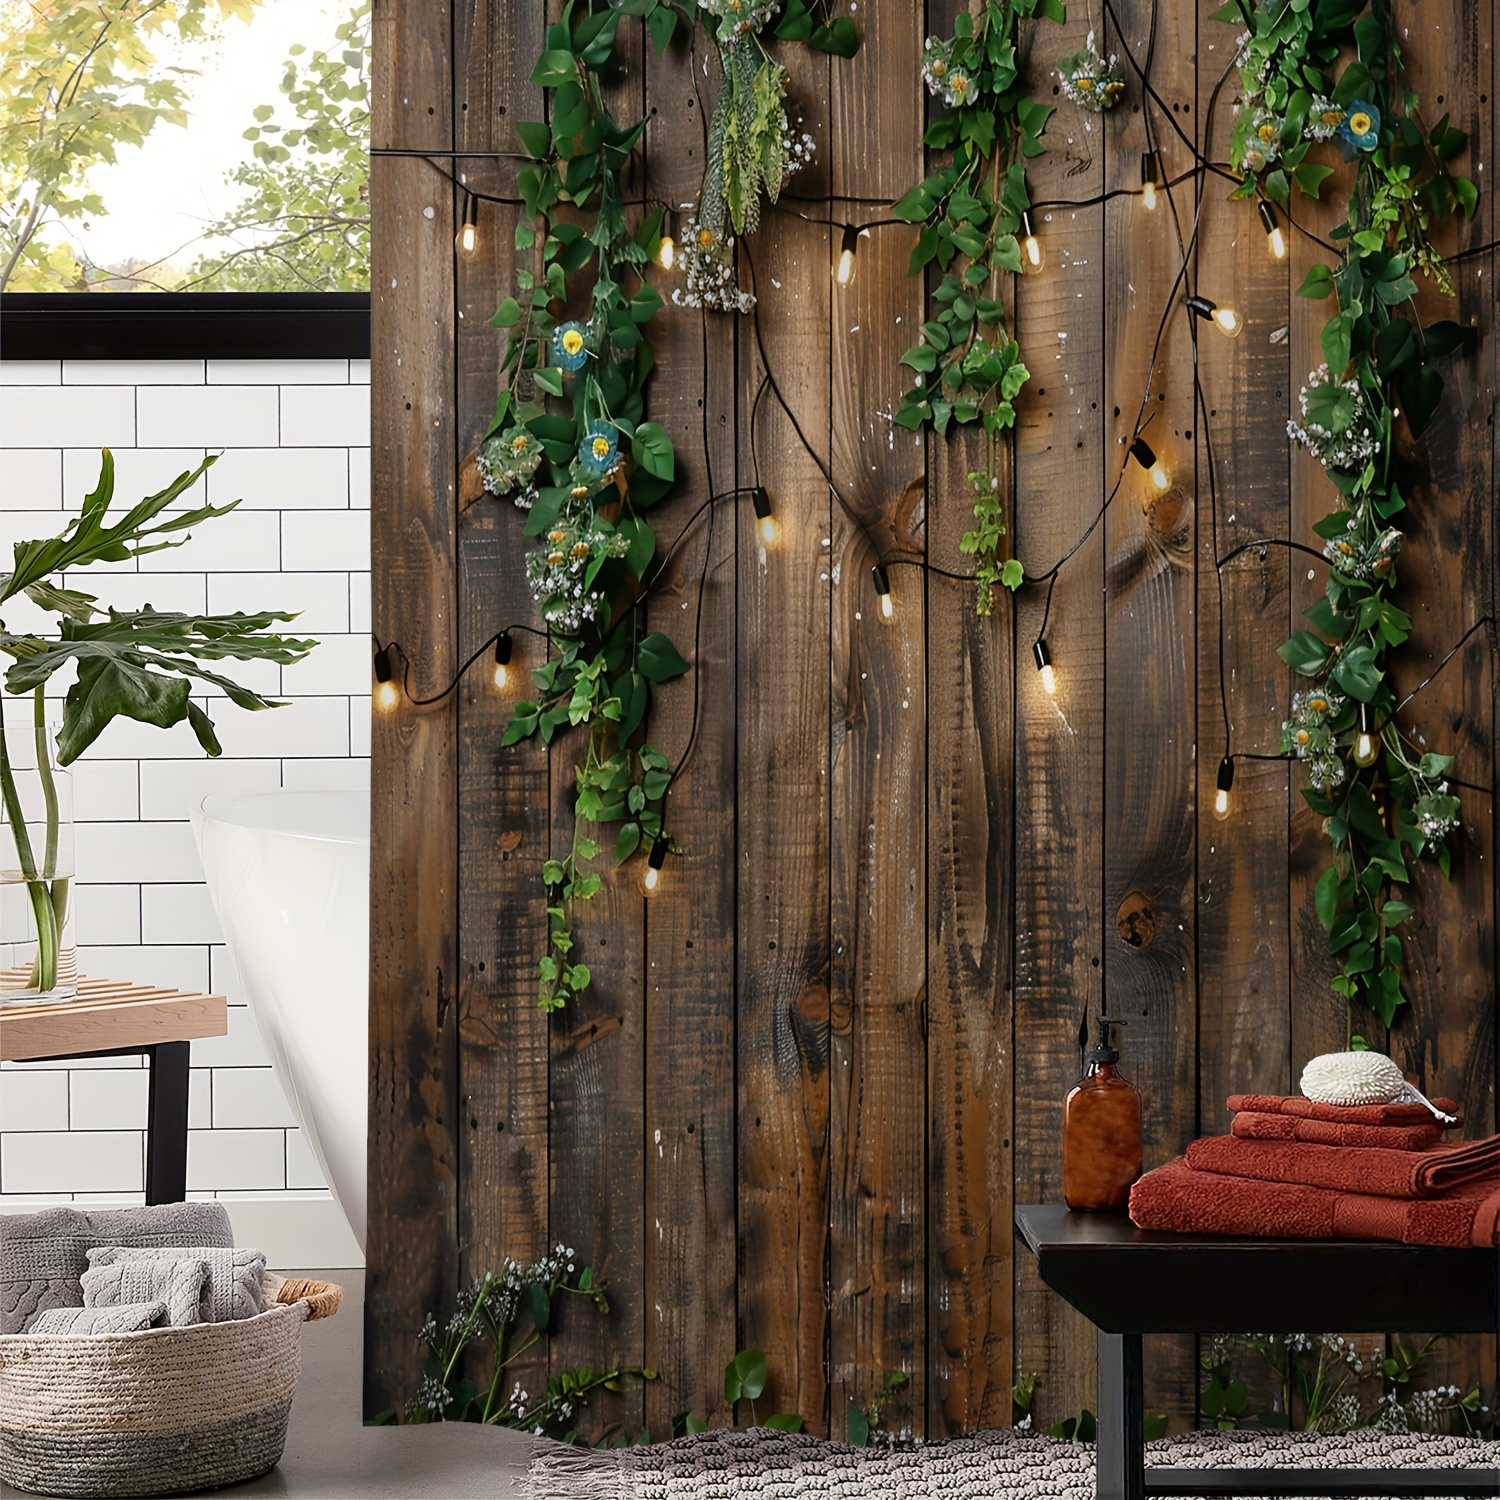 

Vintage Wooden Board Wall With Green Plants, Flowers, Vines & Hanging Lights Print Waterproof Shower Curtain, Polyester Woven Fabric, Artistic Design With 12 Hooks, Water-resistant, Machine Washable